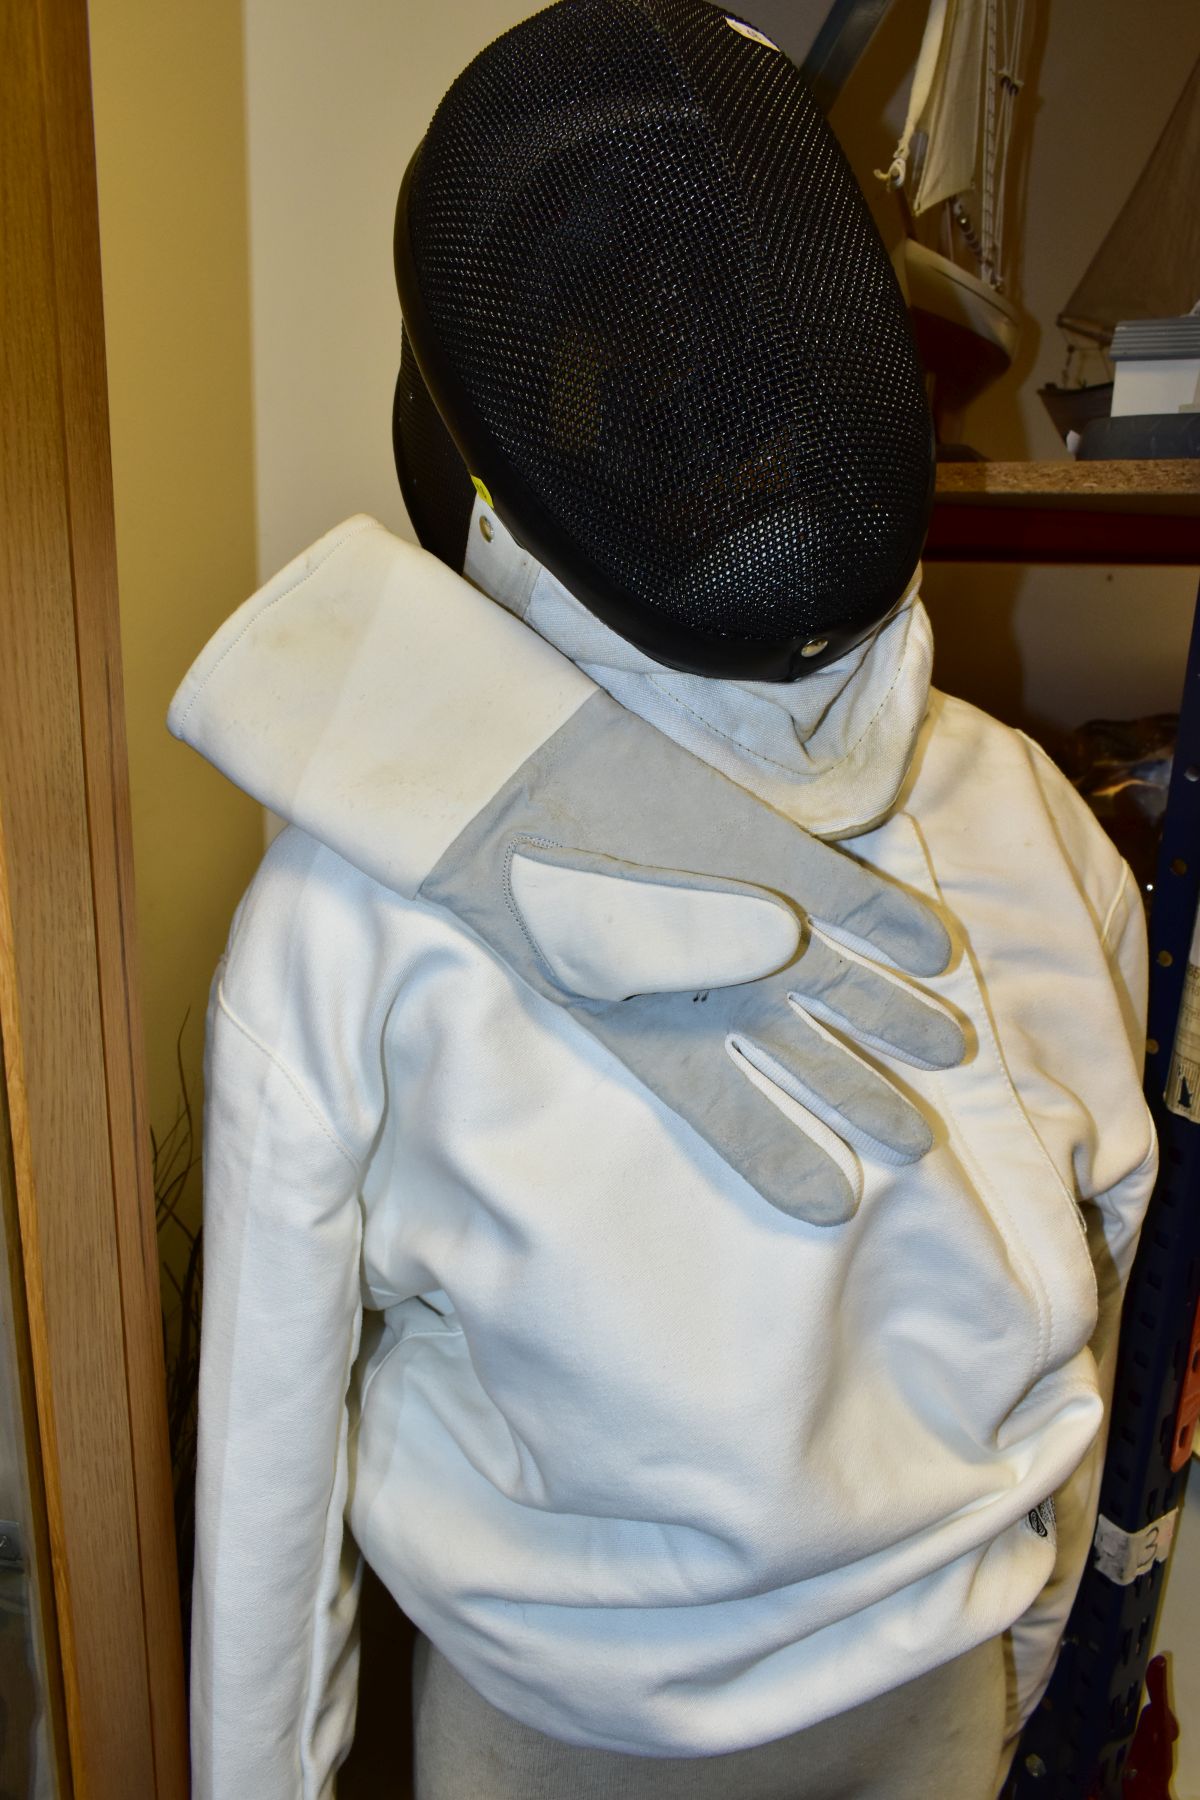 LEON PAUL FENCING MASK, JACKET, FOIL AND BAG, together with a glove (unmarked) - Image 4 of 8